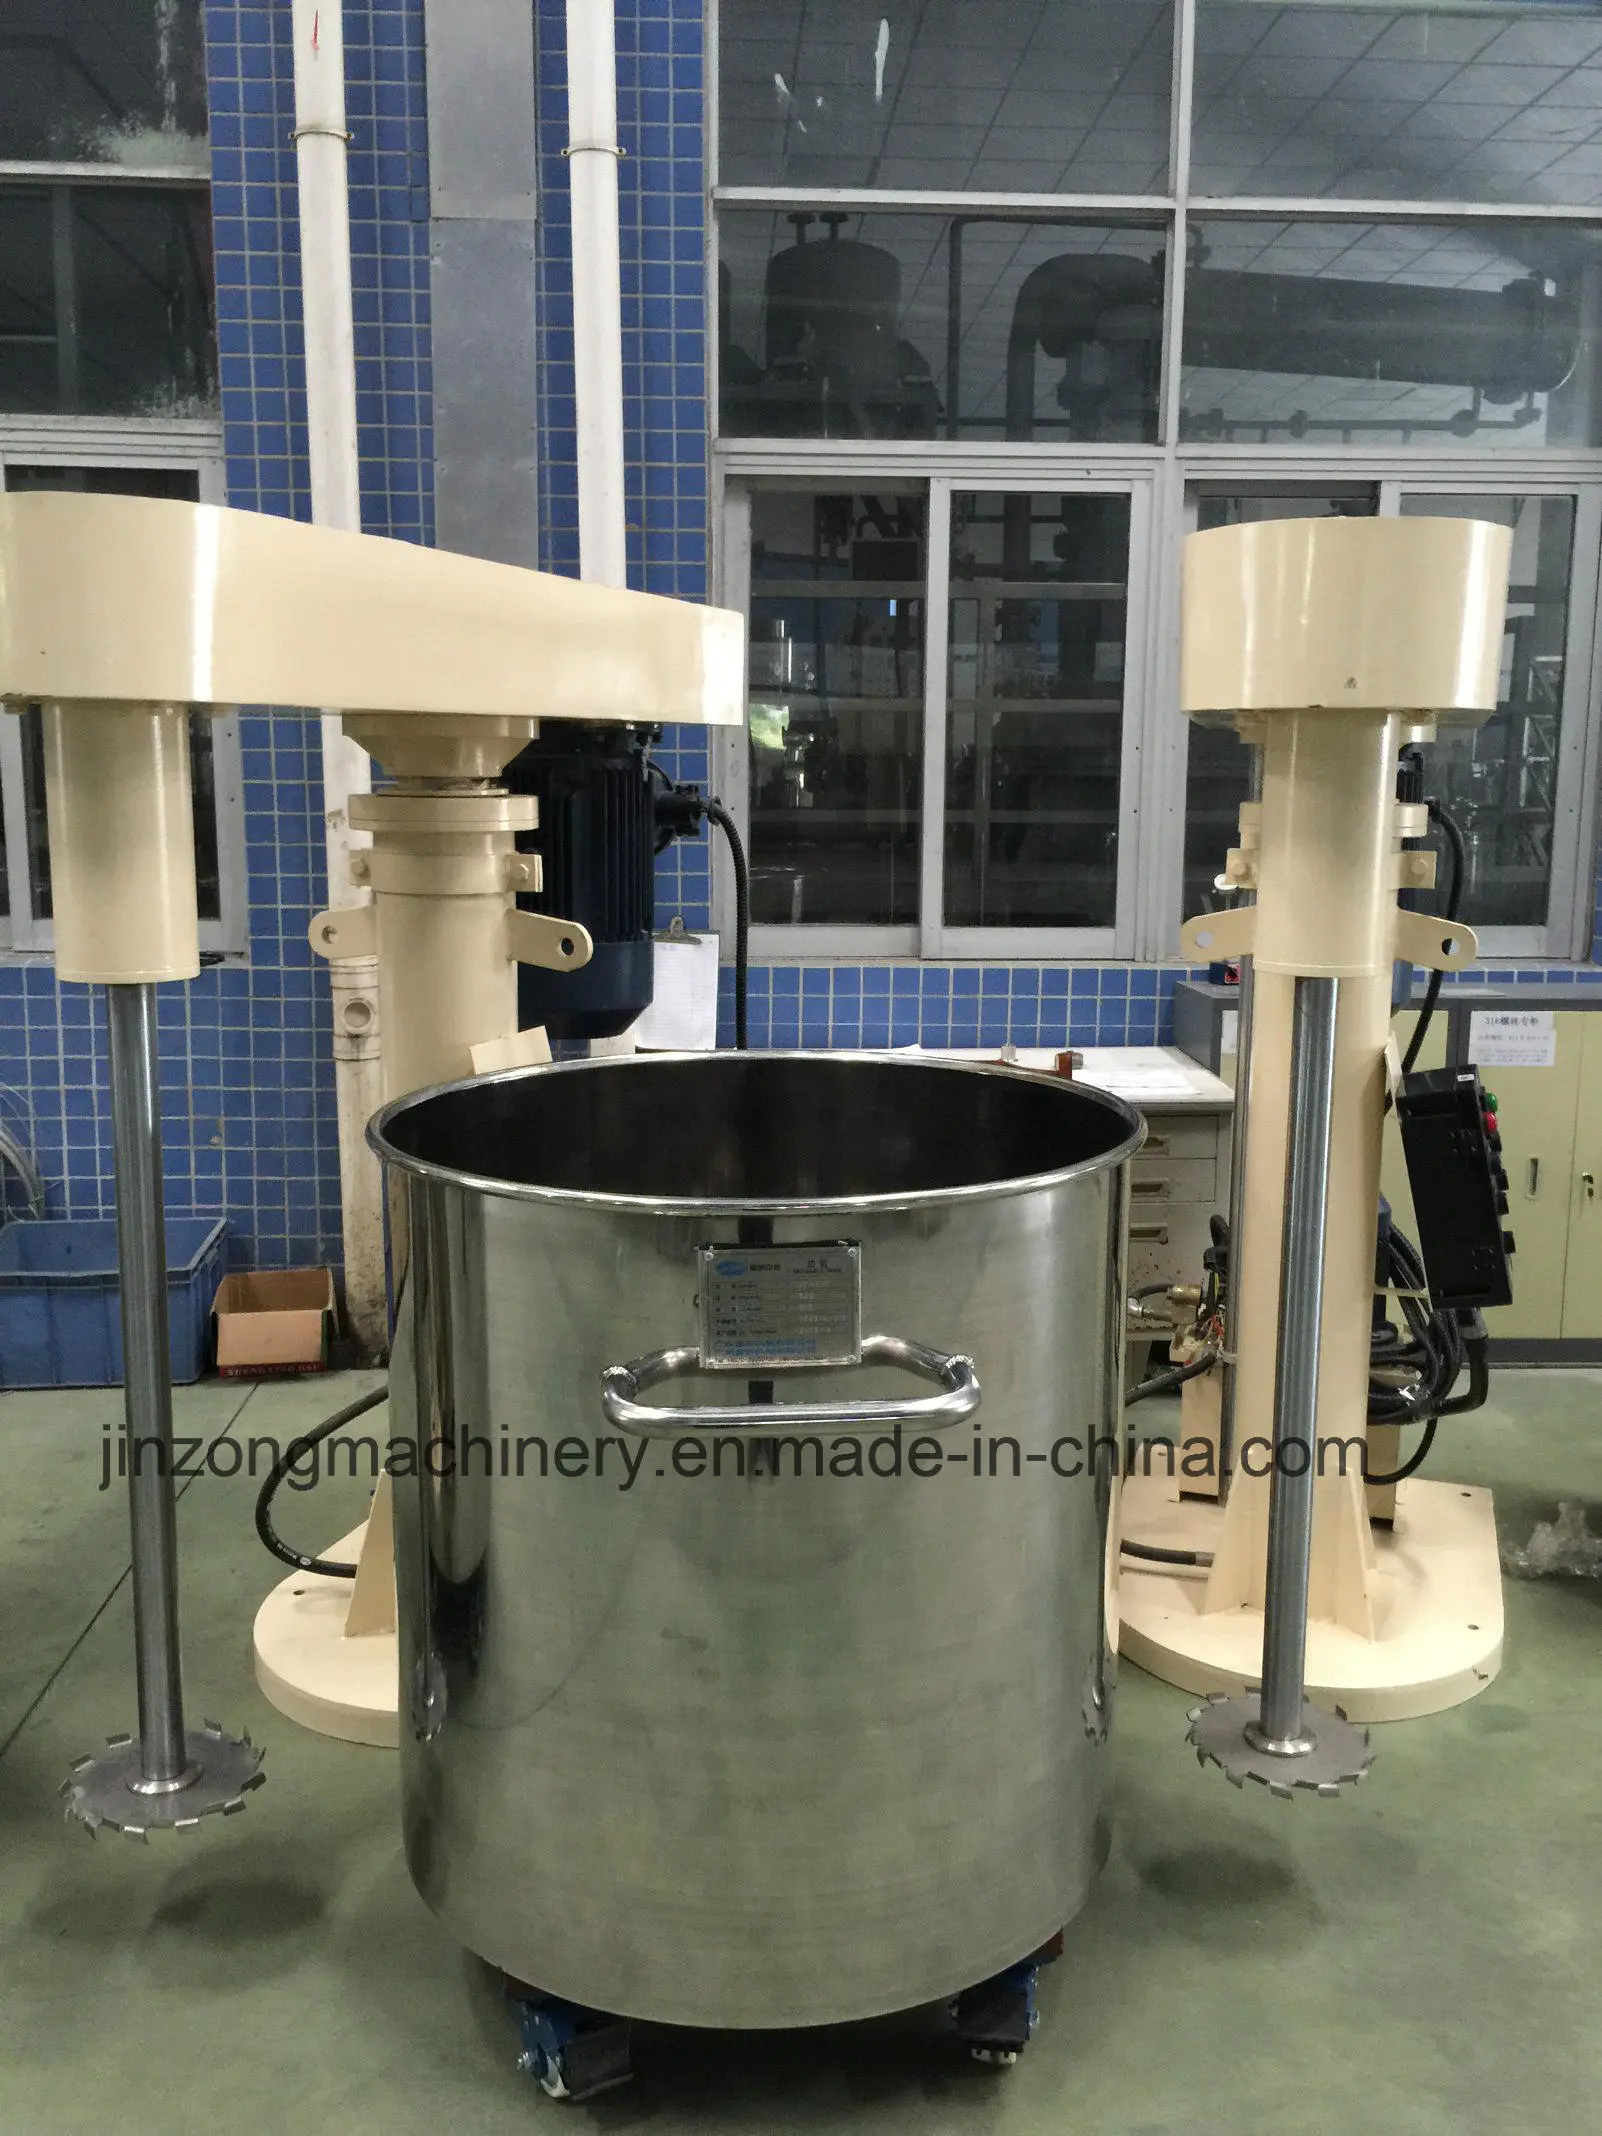 Glue/Printing Ink/Paint Making Machines Stainless Steel Paint Mixer Production Machine Price